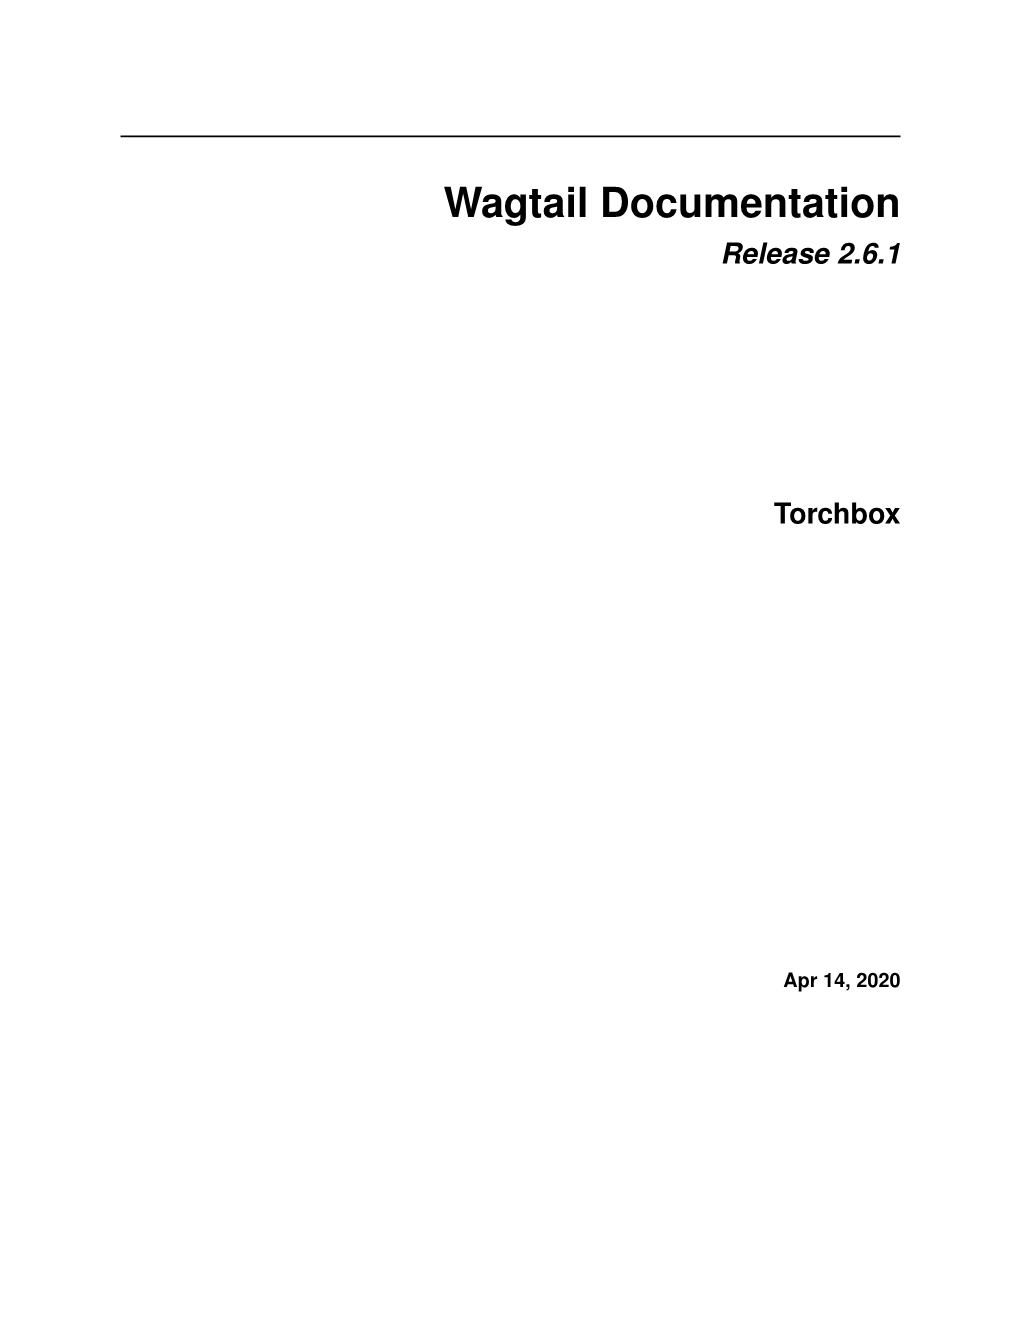 Wagtail Documentation Release 2.6.1